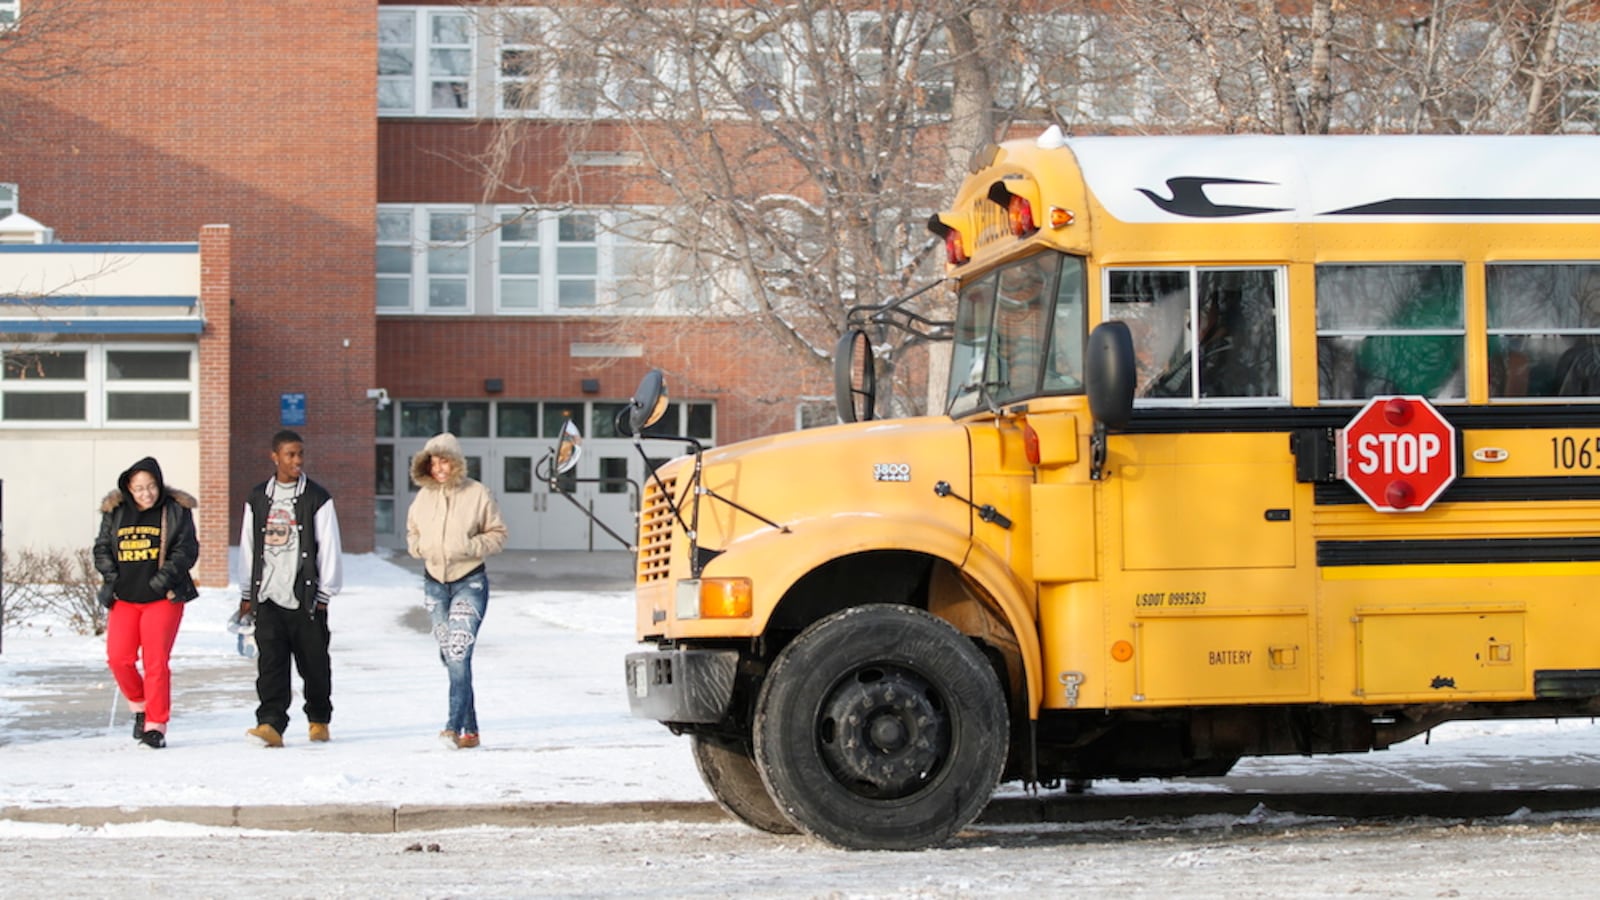 A school bus sits outside a high school in winter. Three students walk by the bus.